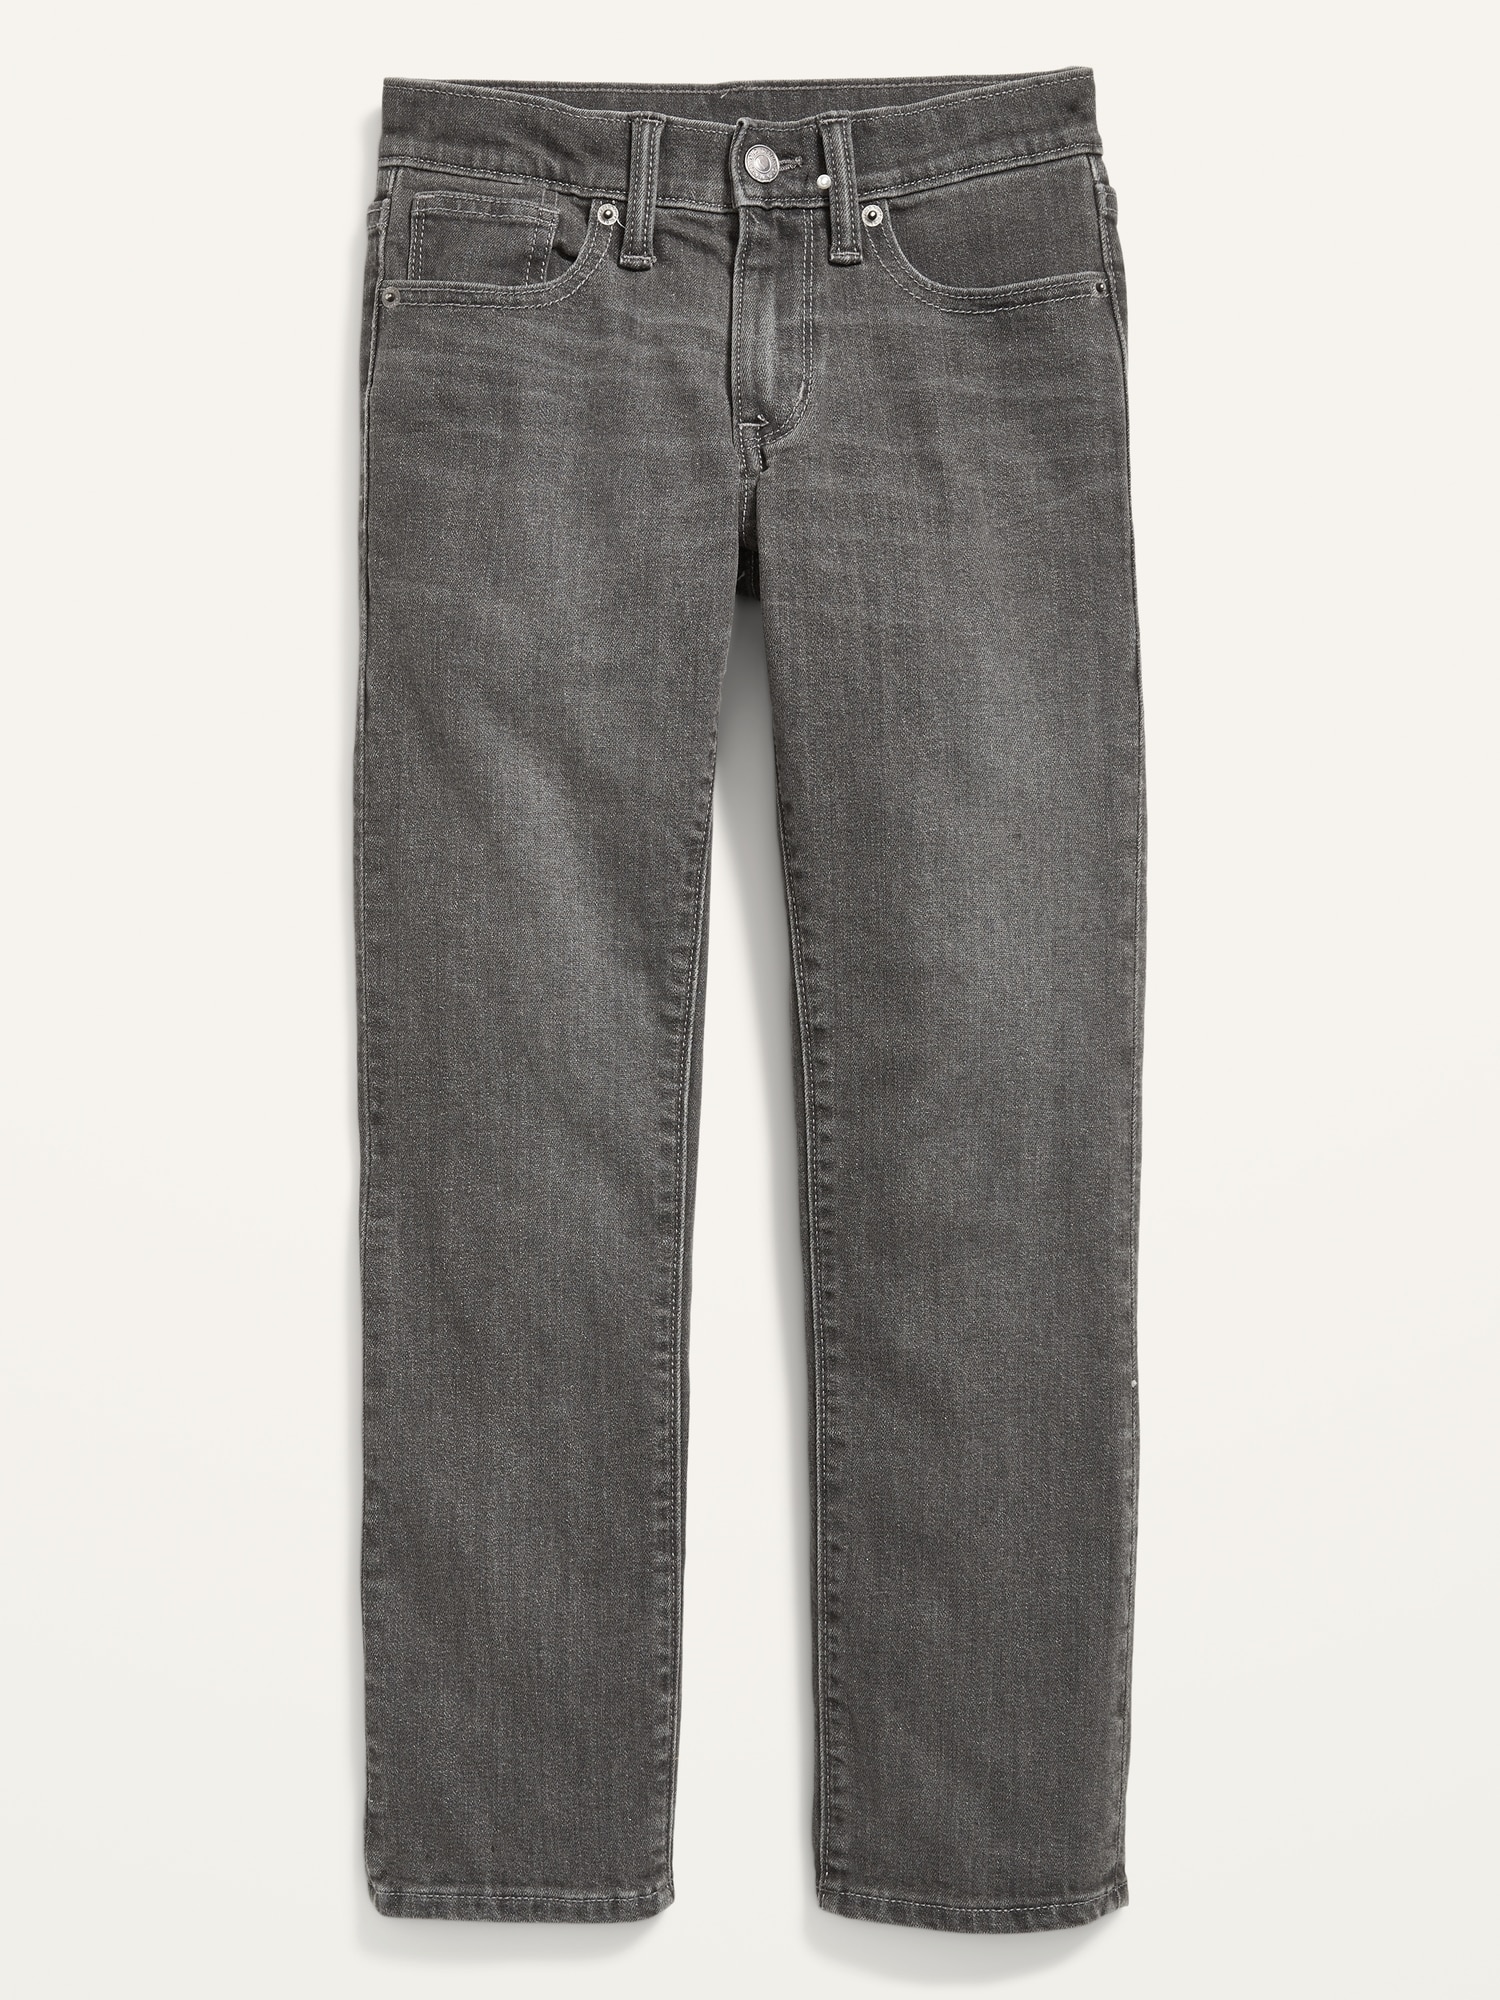 Old Navy Straight Jeans for Boys gray. 1